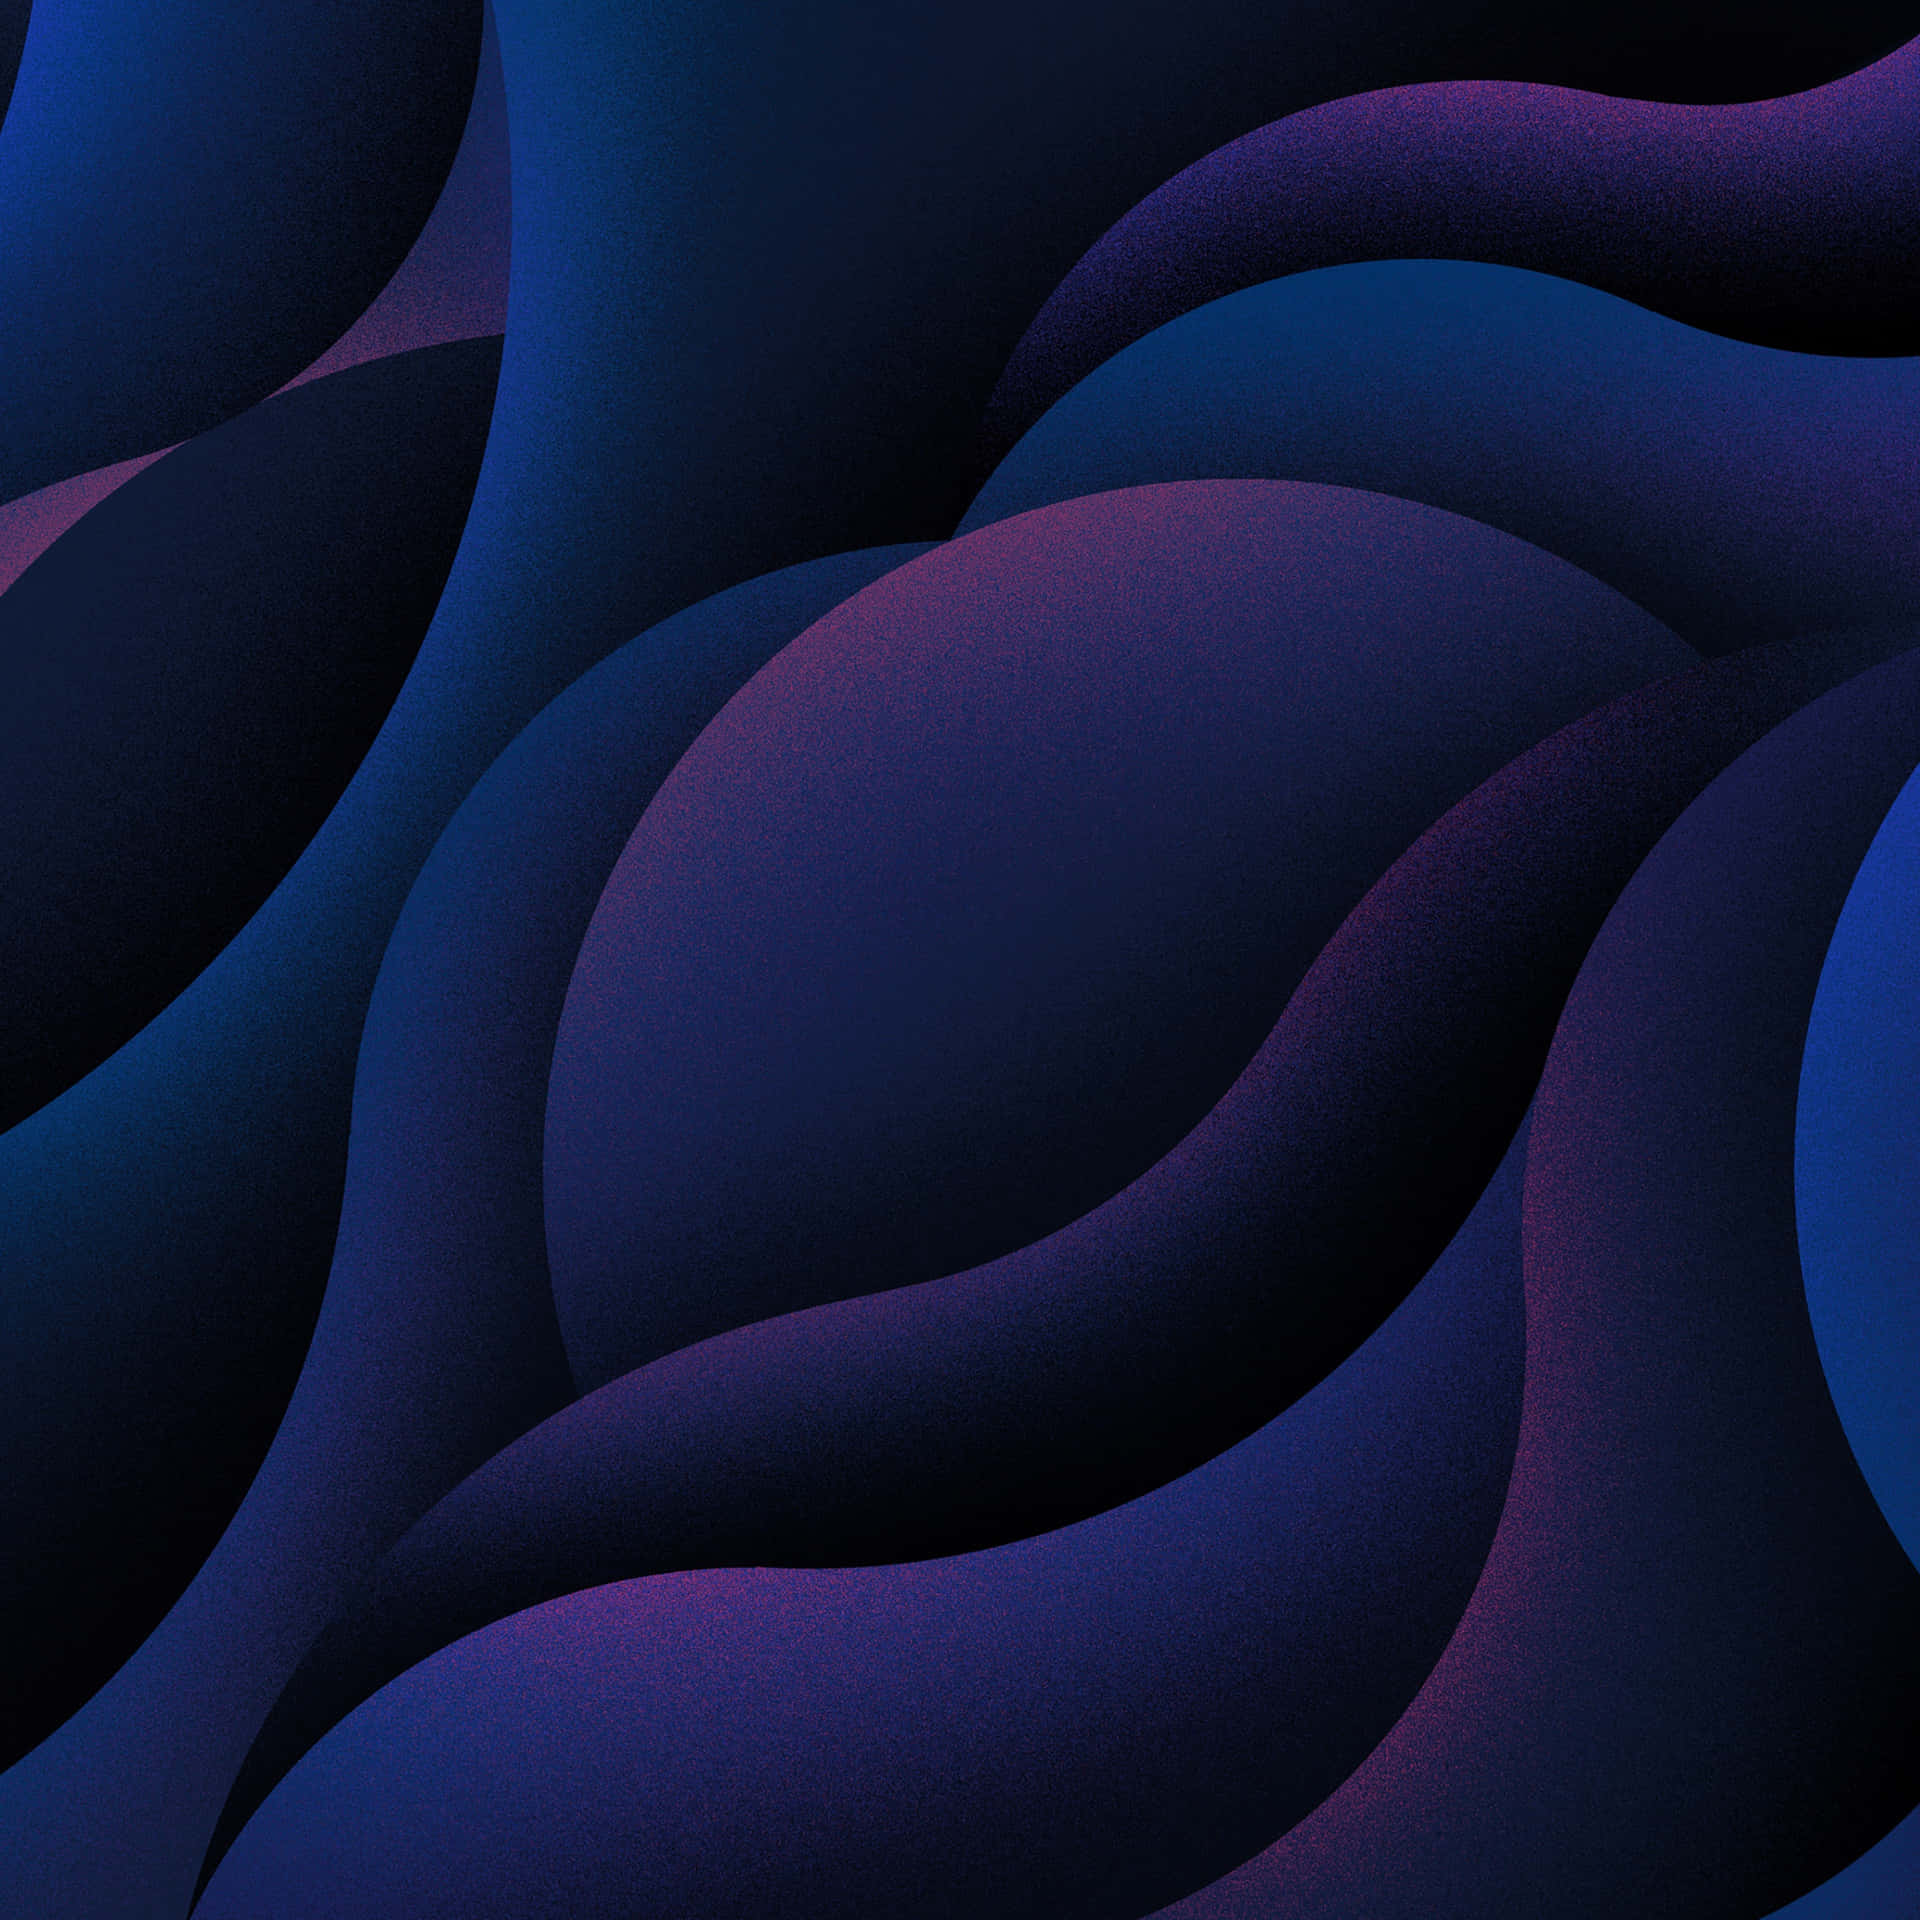 A Blue And Purple Abstract Background With Wavy Lines